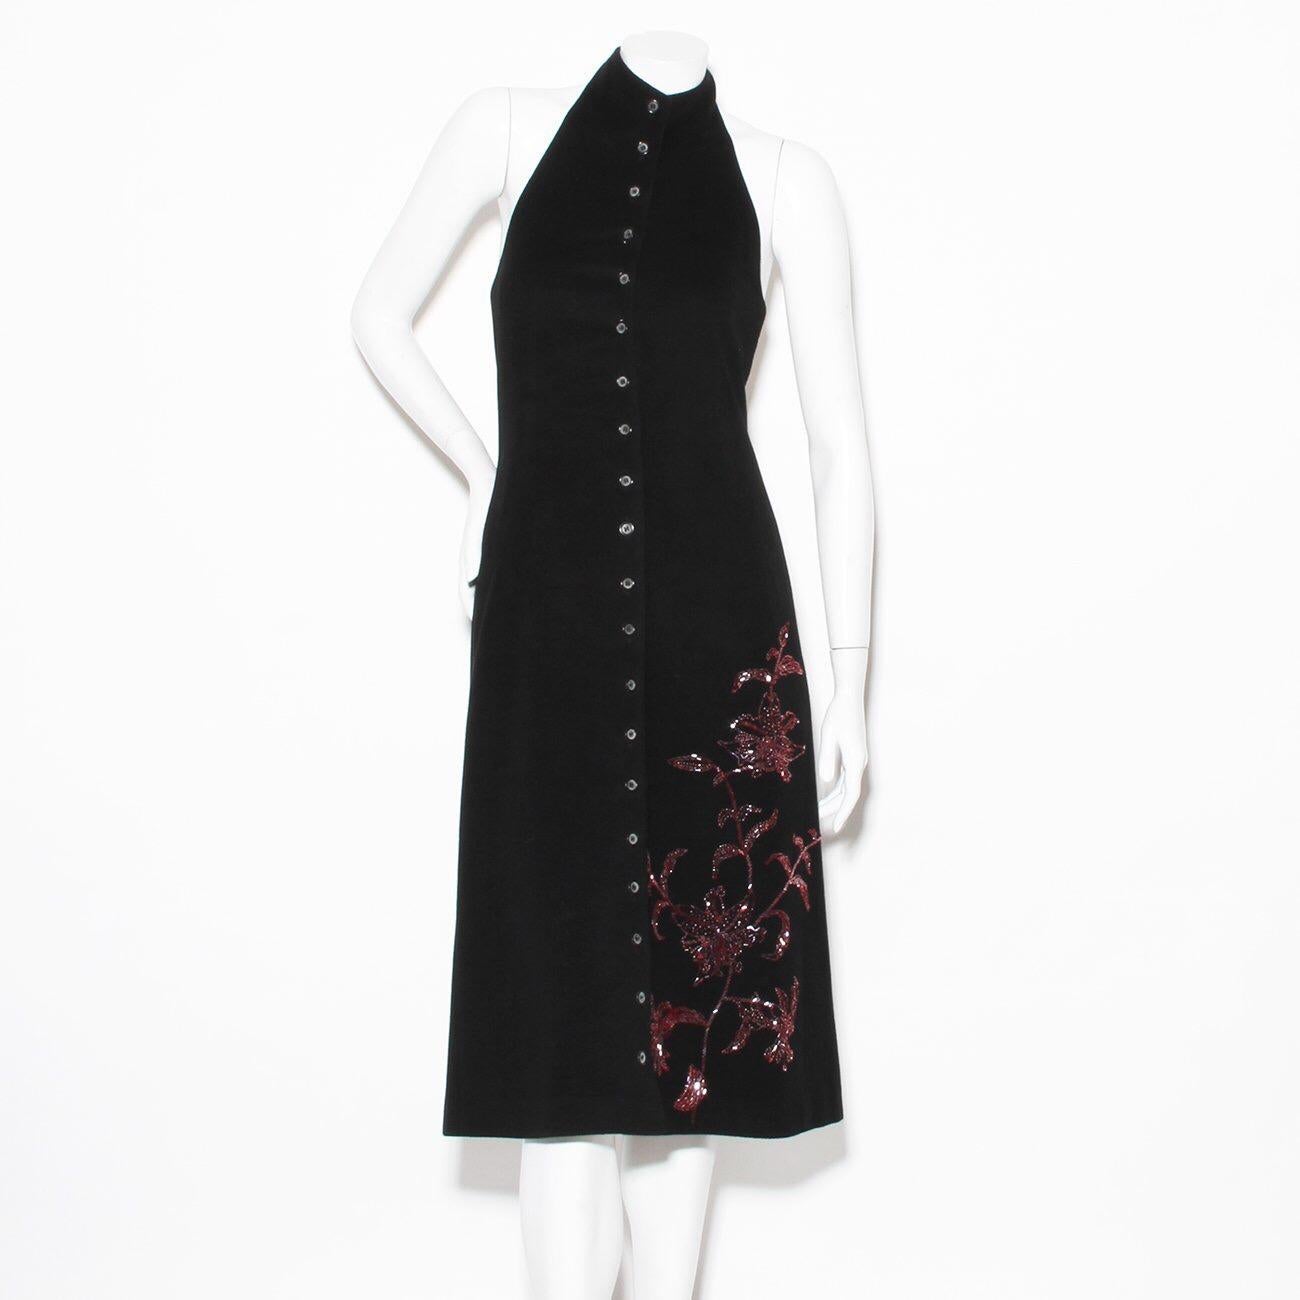 Product Details:
Wool beaded dress by Alexander McQueen
Fall 1998 Joan Collection
Black wool exterior 
Halter top high neck 
Open back 
Button down front 
Red floral print beading at bottom 
Red lining with Mqueen logo  printed 
Made in